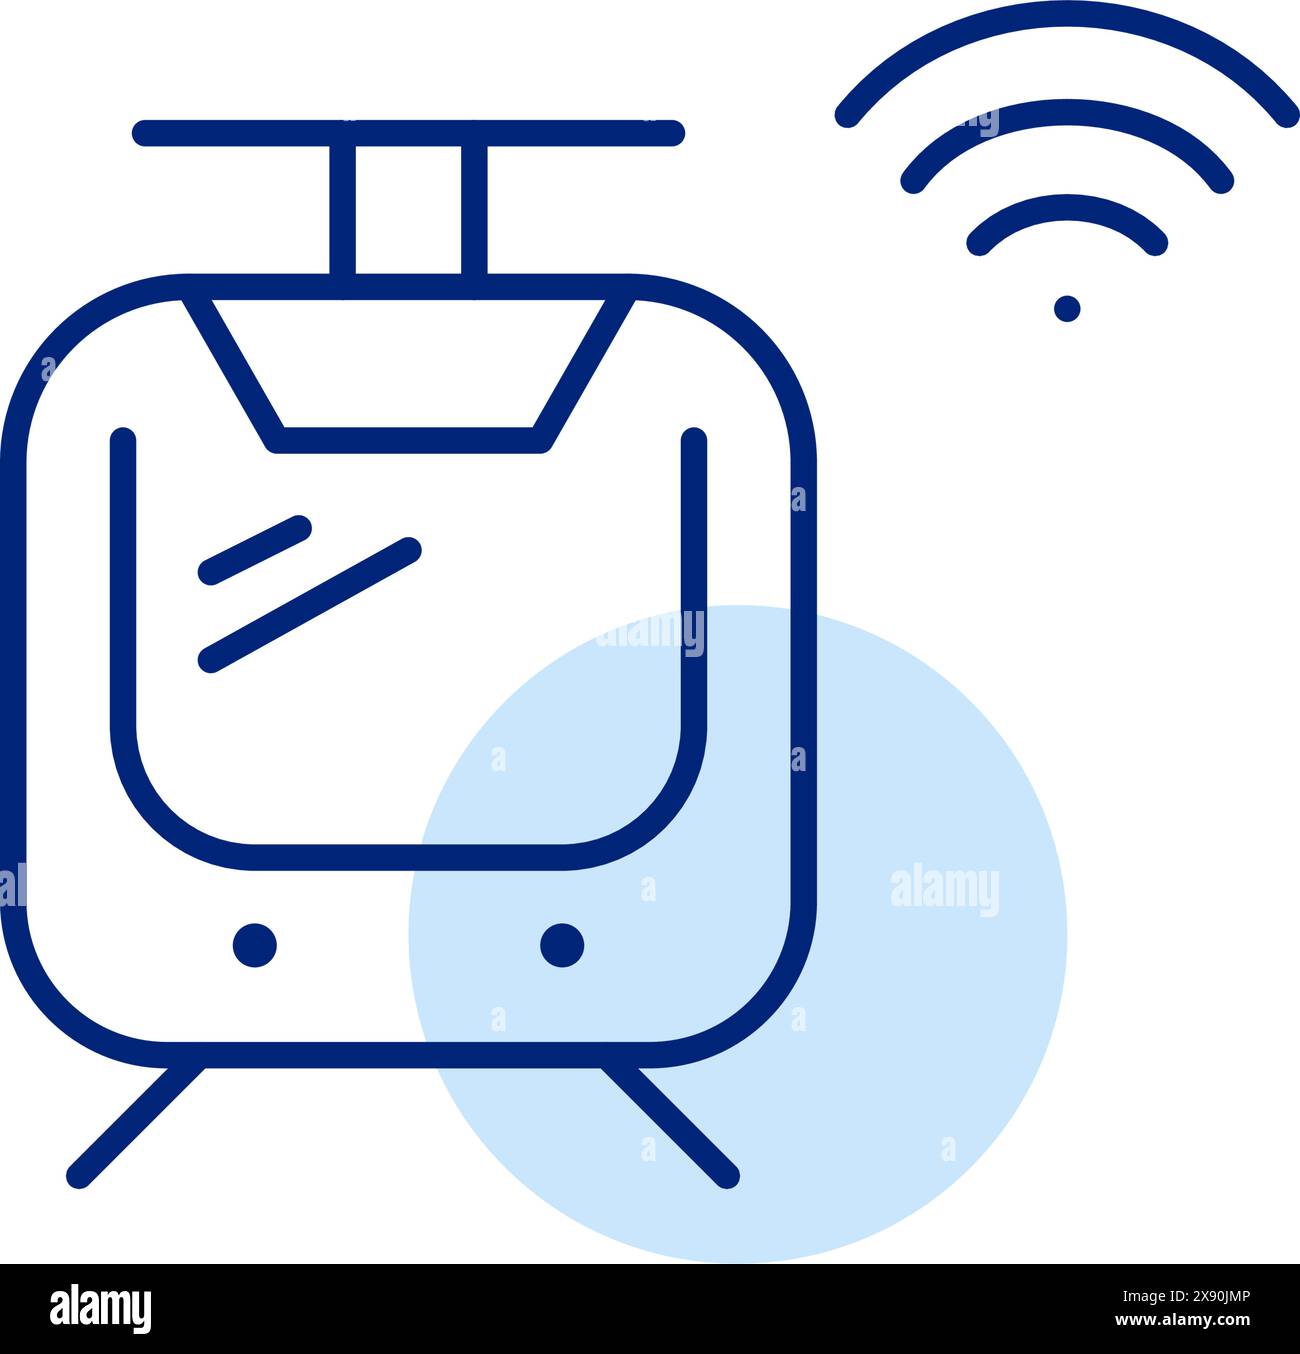 Tram and wifi symbol. Smart transport, wireless transit internet access. Digital technology, urban mobility. Vector icon Stock Vector